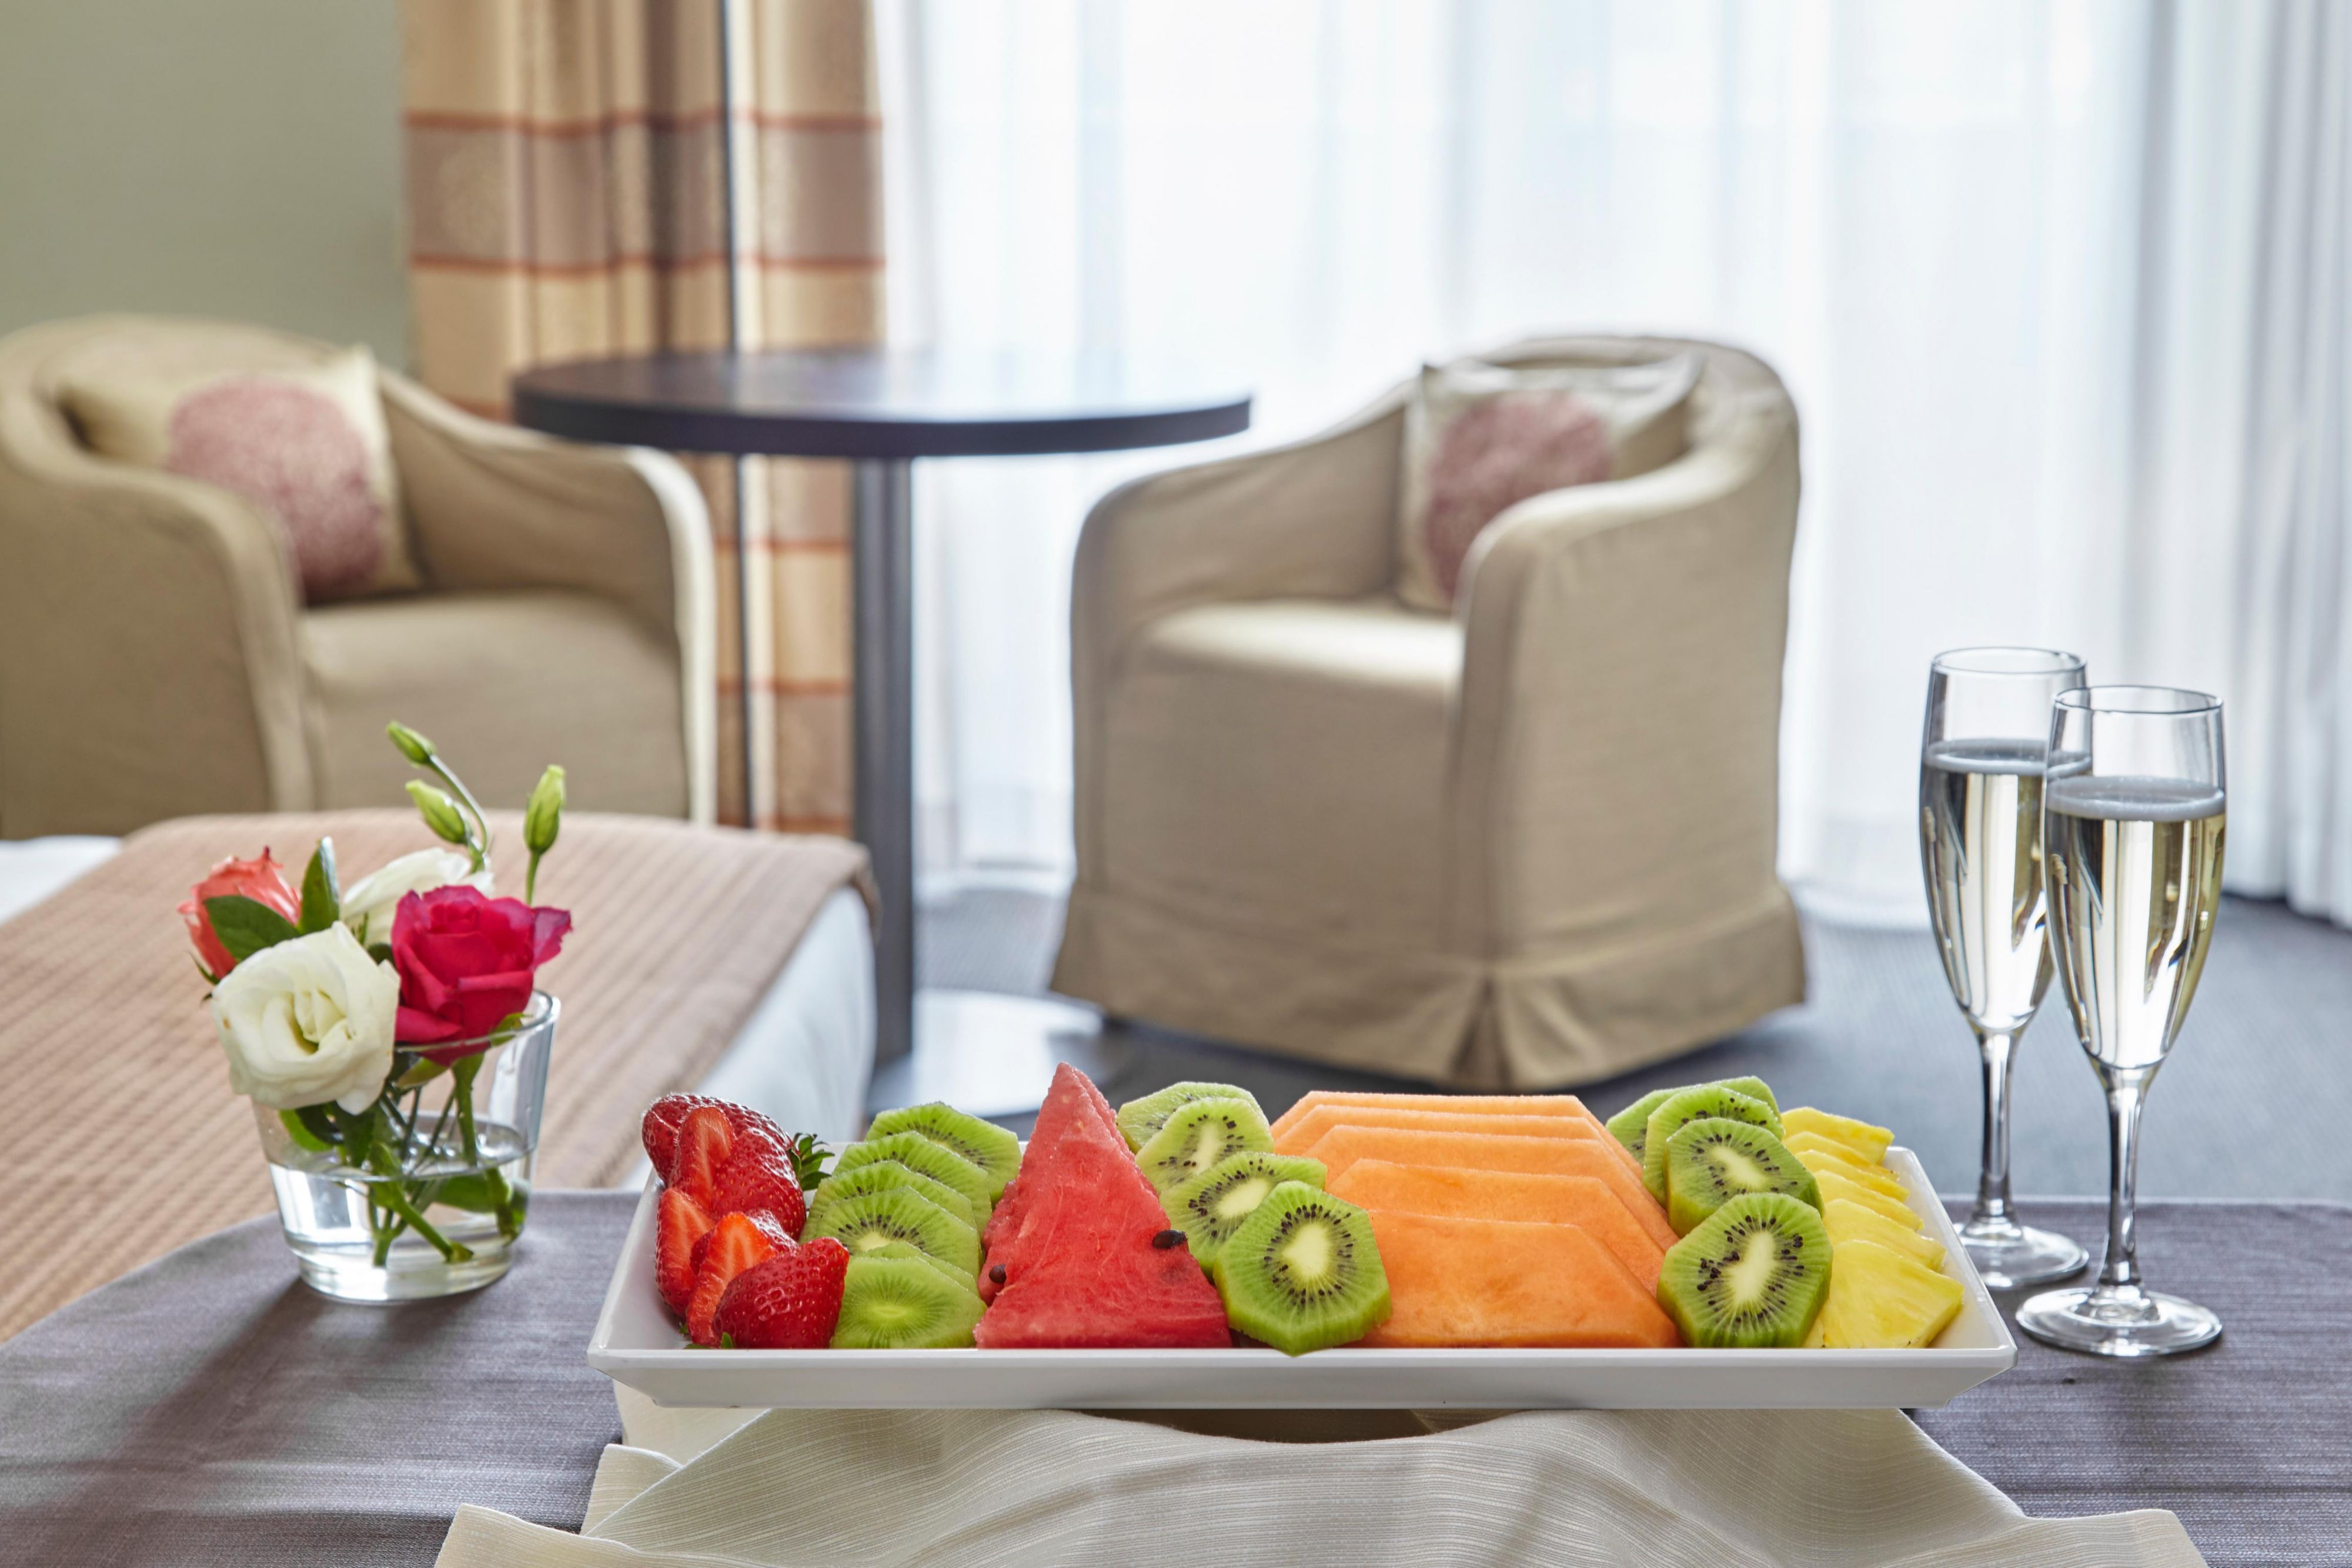 Enjoy our room service by sitting in our comfy rooms